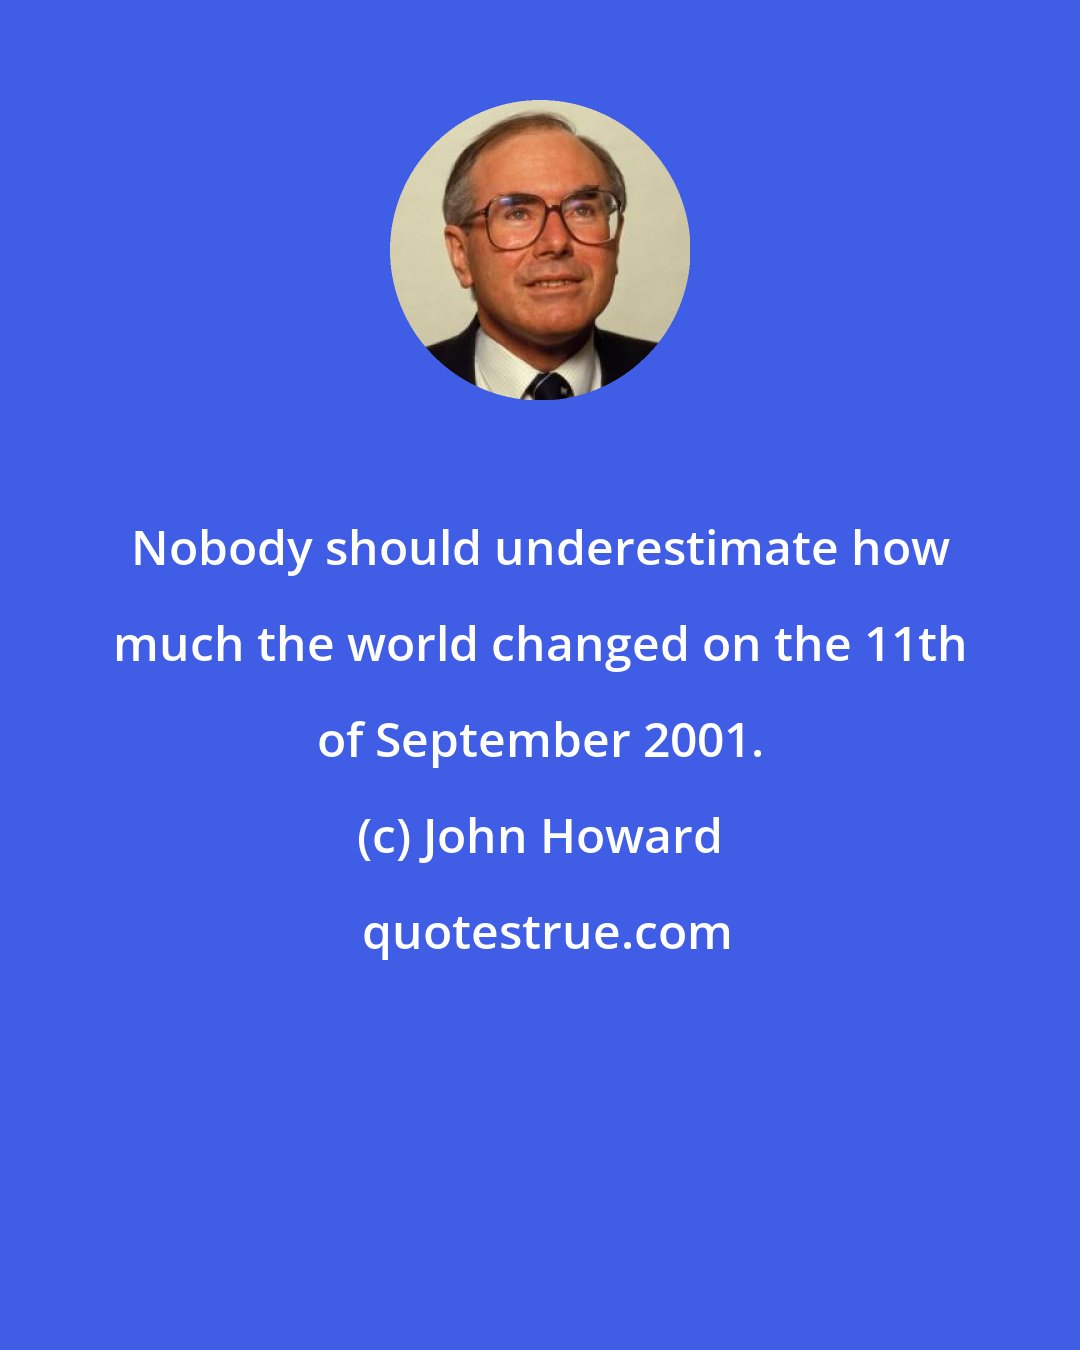 John Howard: Nobody should underestimate how much the world changed on the 11th of September 2001.